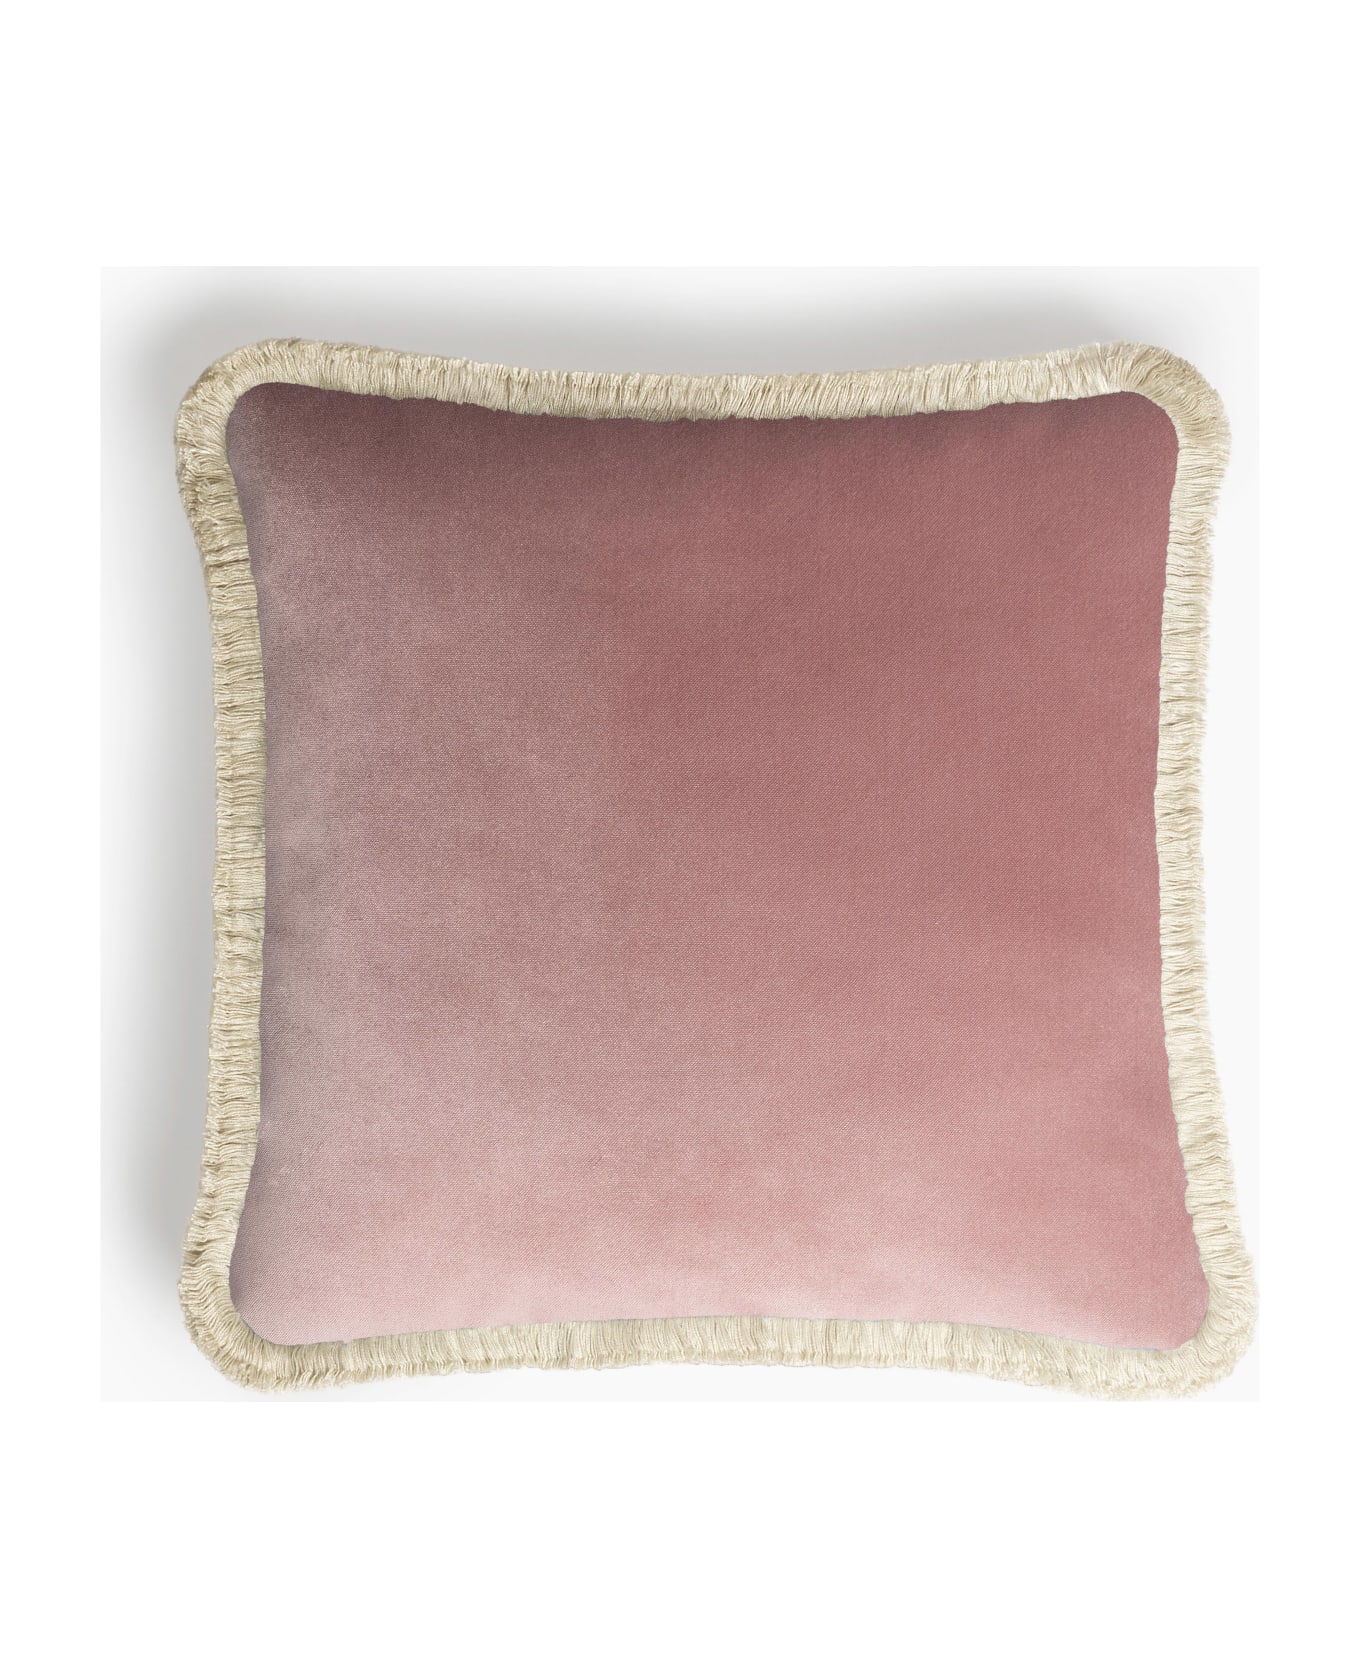 Lo Decor Happy Pillow Pink Velvet Dirty White Fringes - pink / dirty white クッション